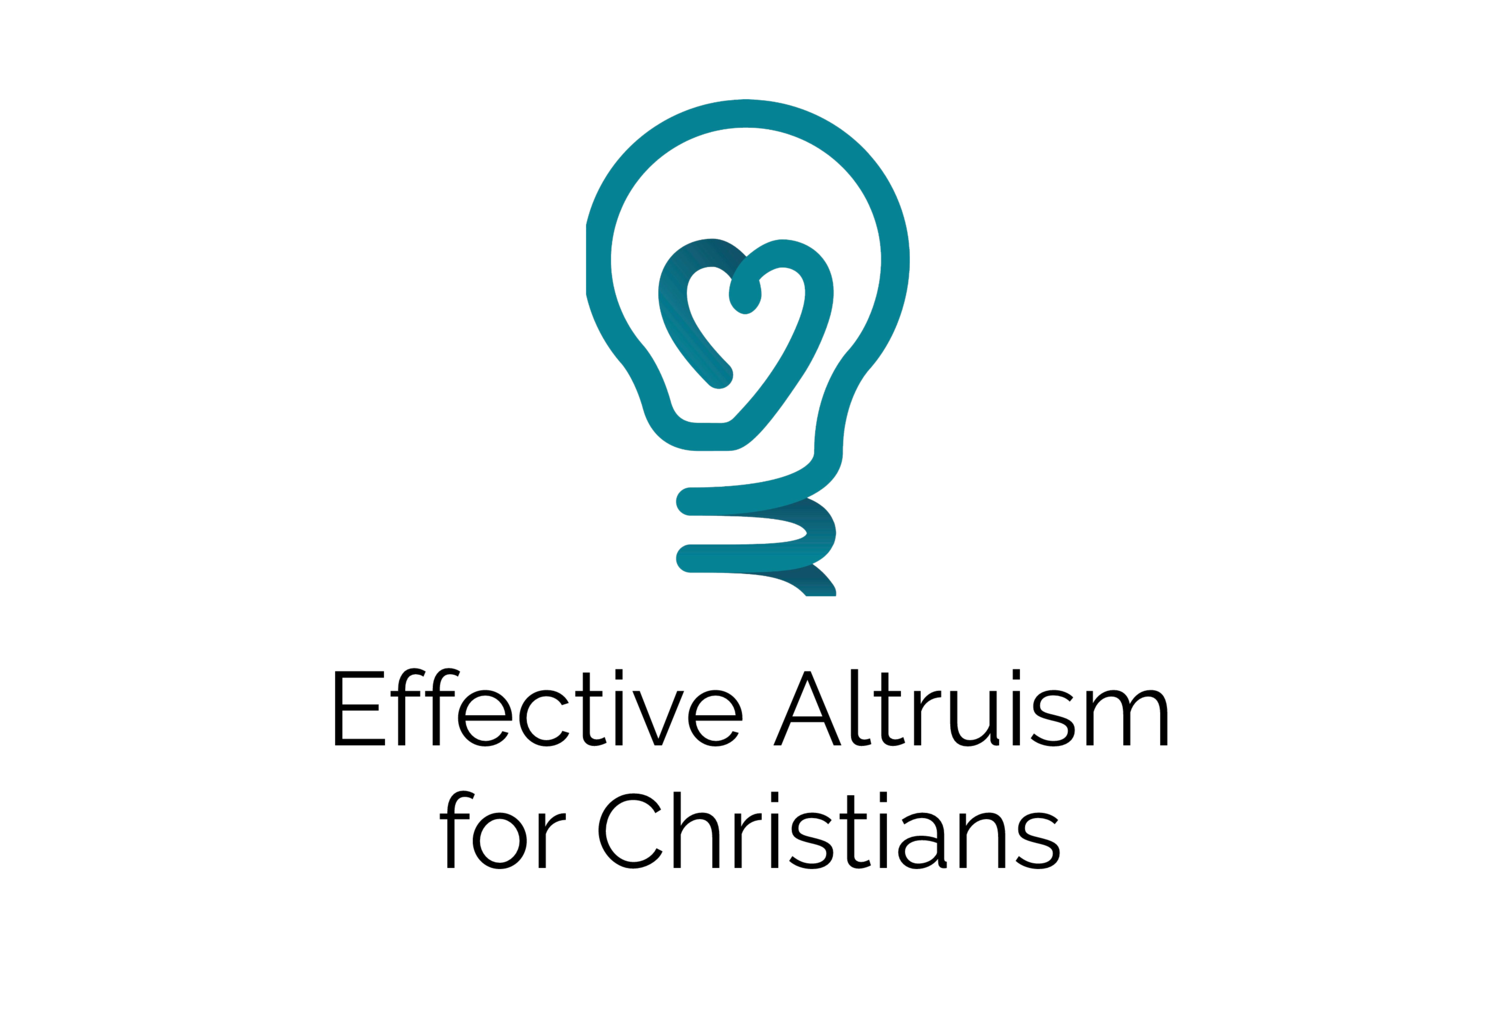 Effective Altruism for Christians